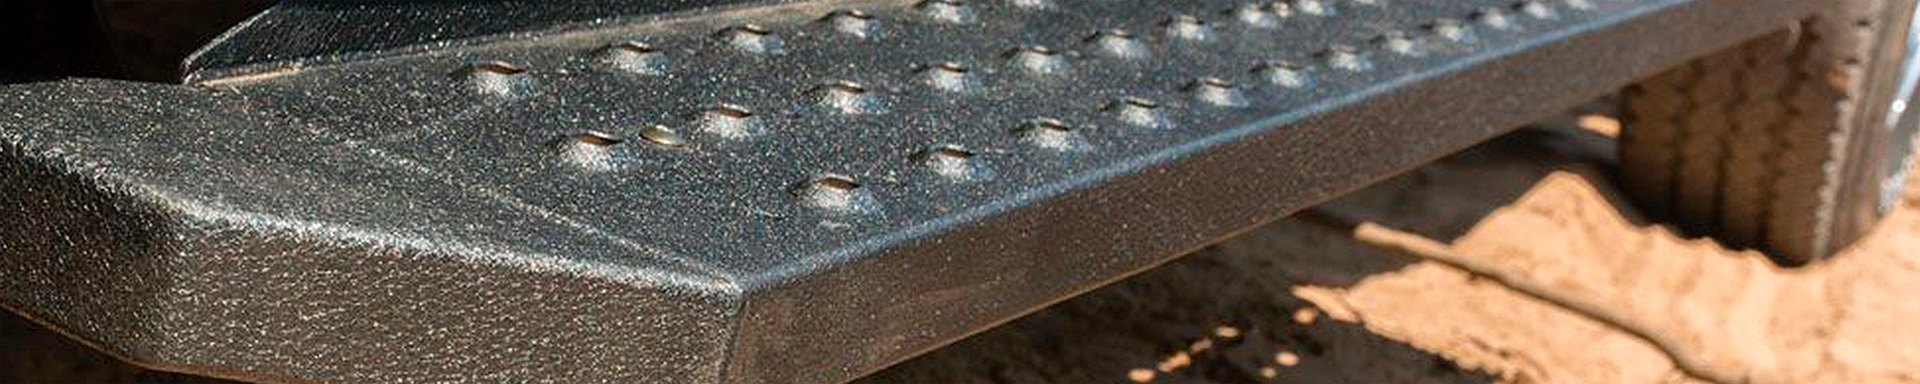 New All-Steel 6.5" RidgeStep Series Running Boards By Aries For Trucks & Commercial Vans